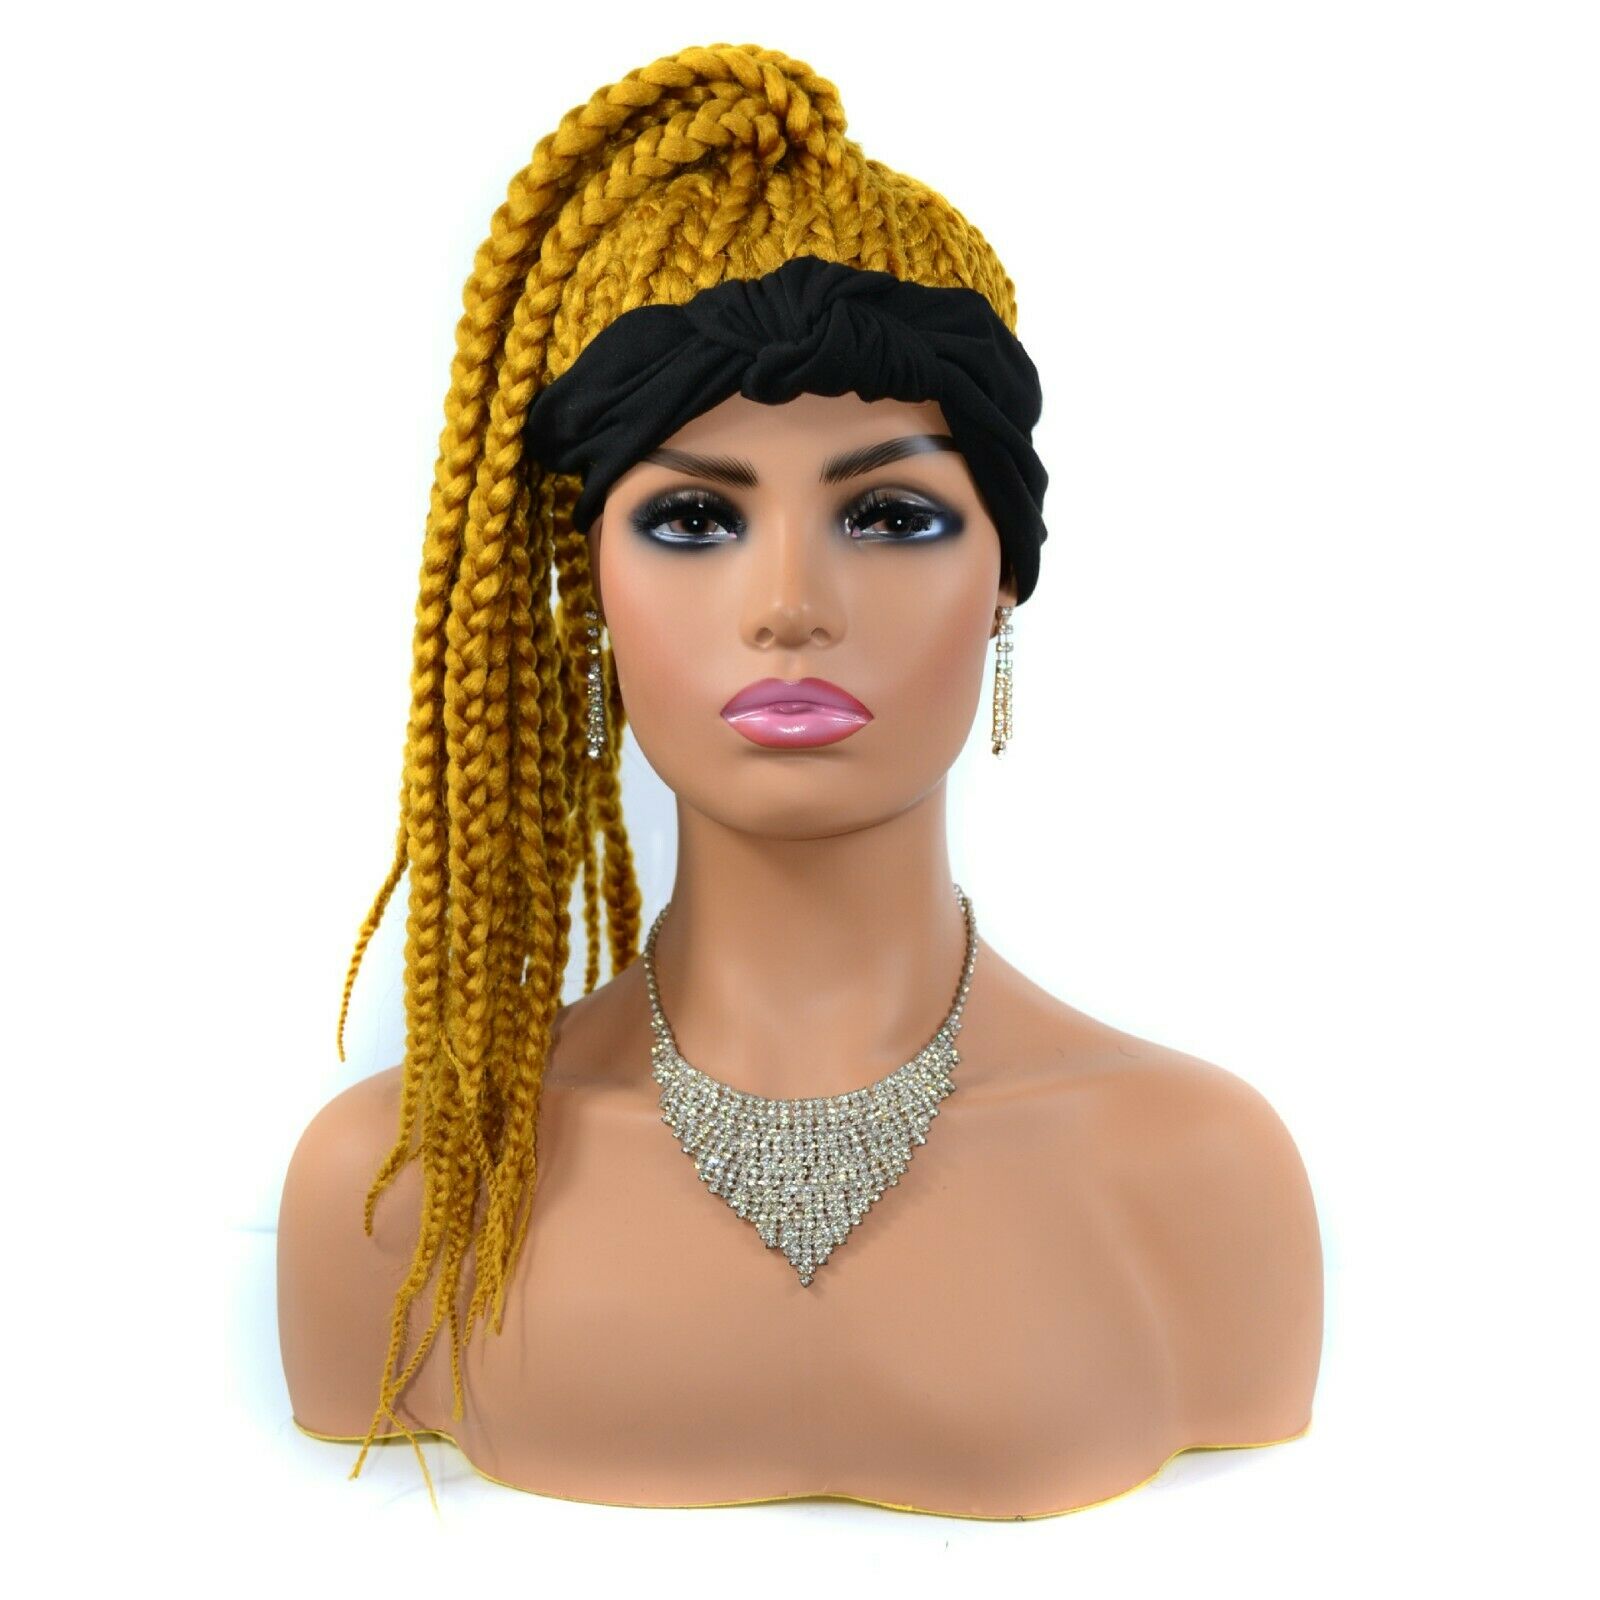 18" Box Braids Ponytail Headband Wigs Synthetic Hair Wrap Wigs for Lady Women